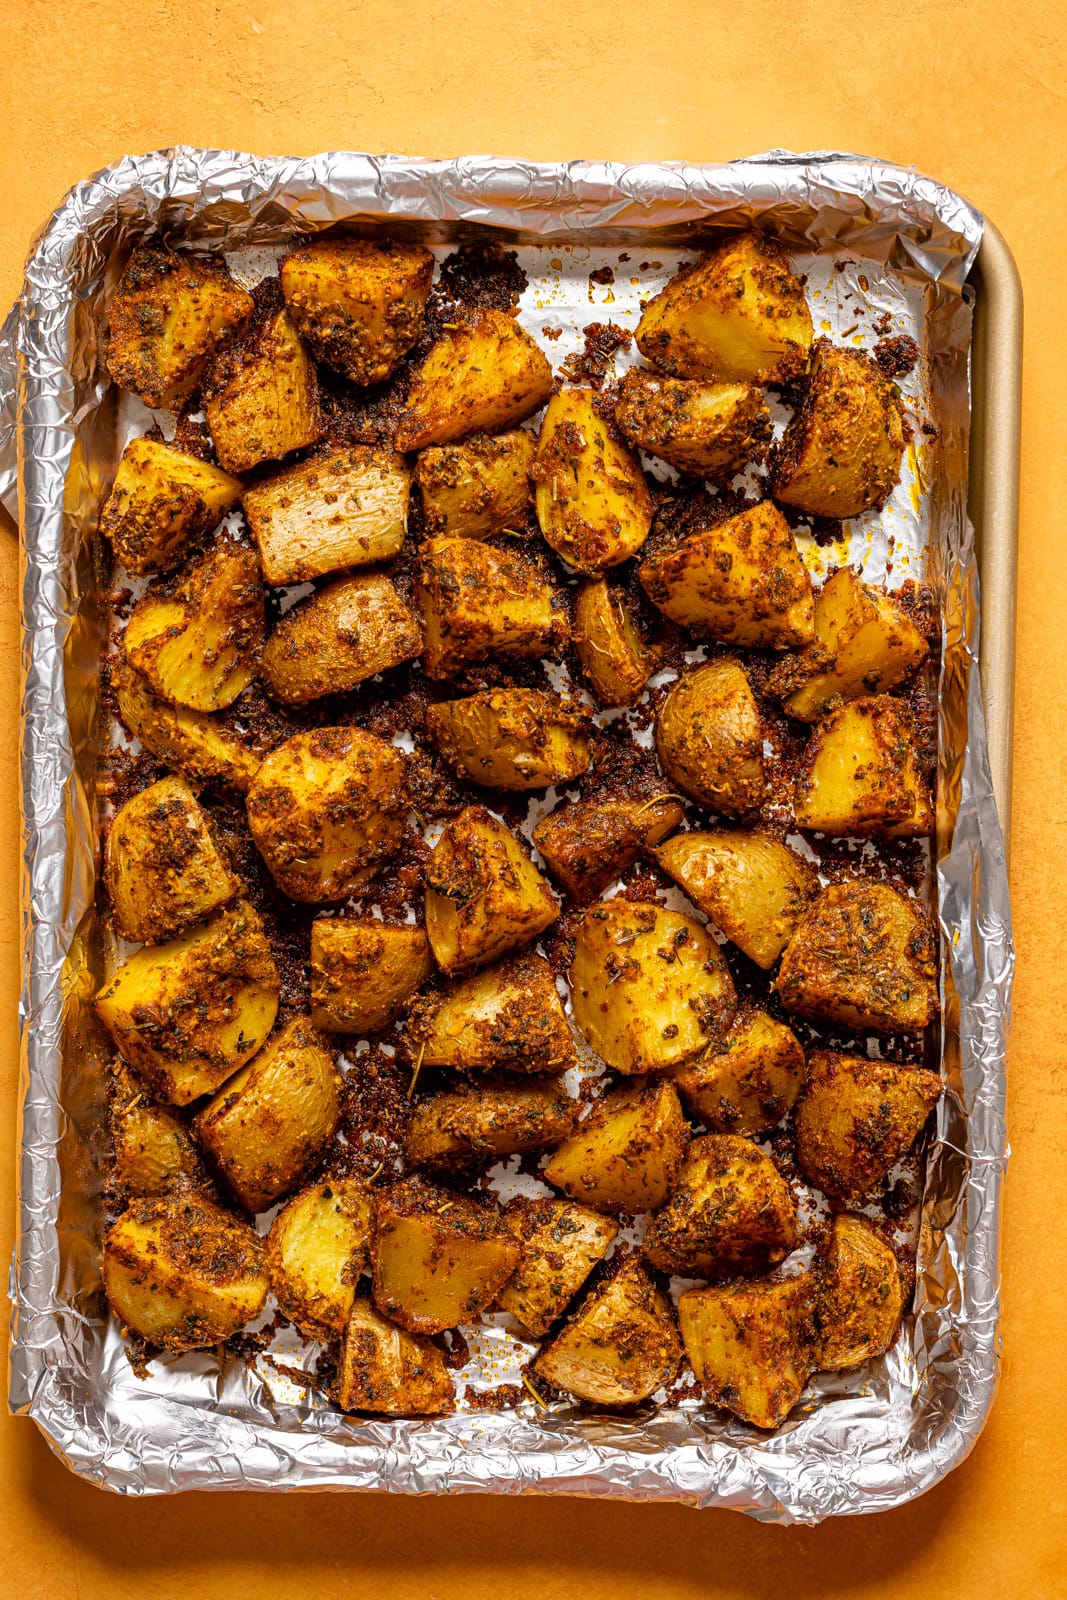 Roasted potatoes on a baking sheet lined with foil.